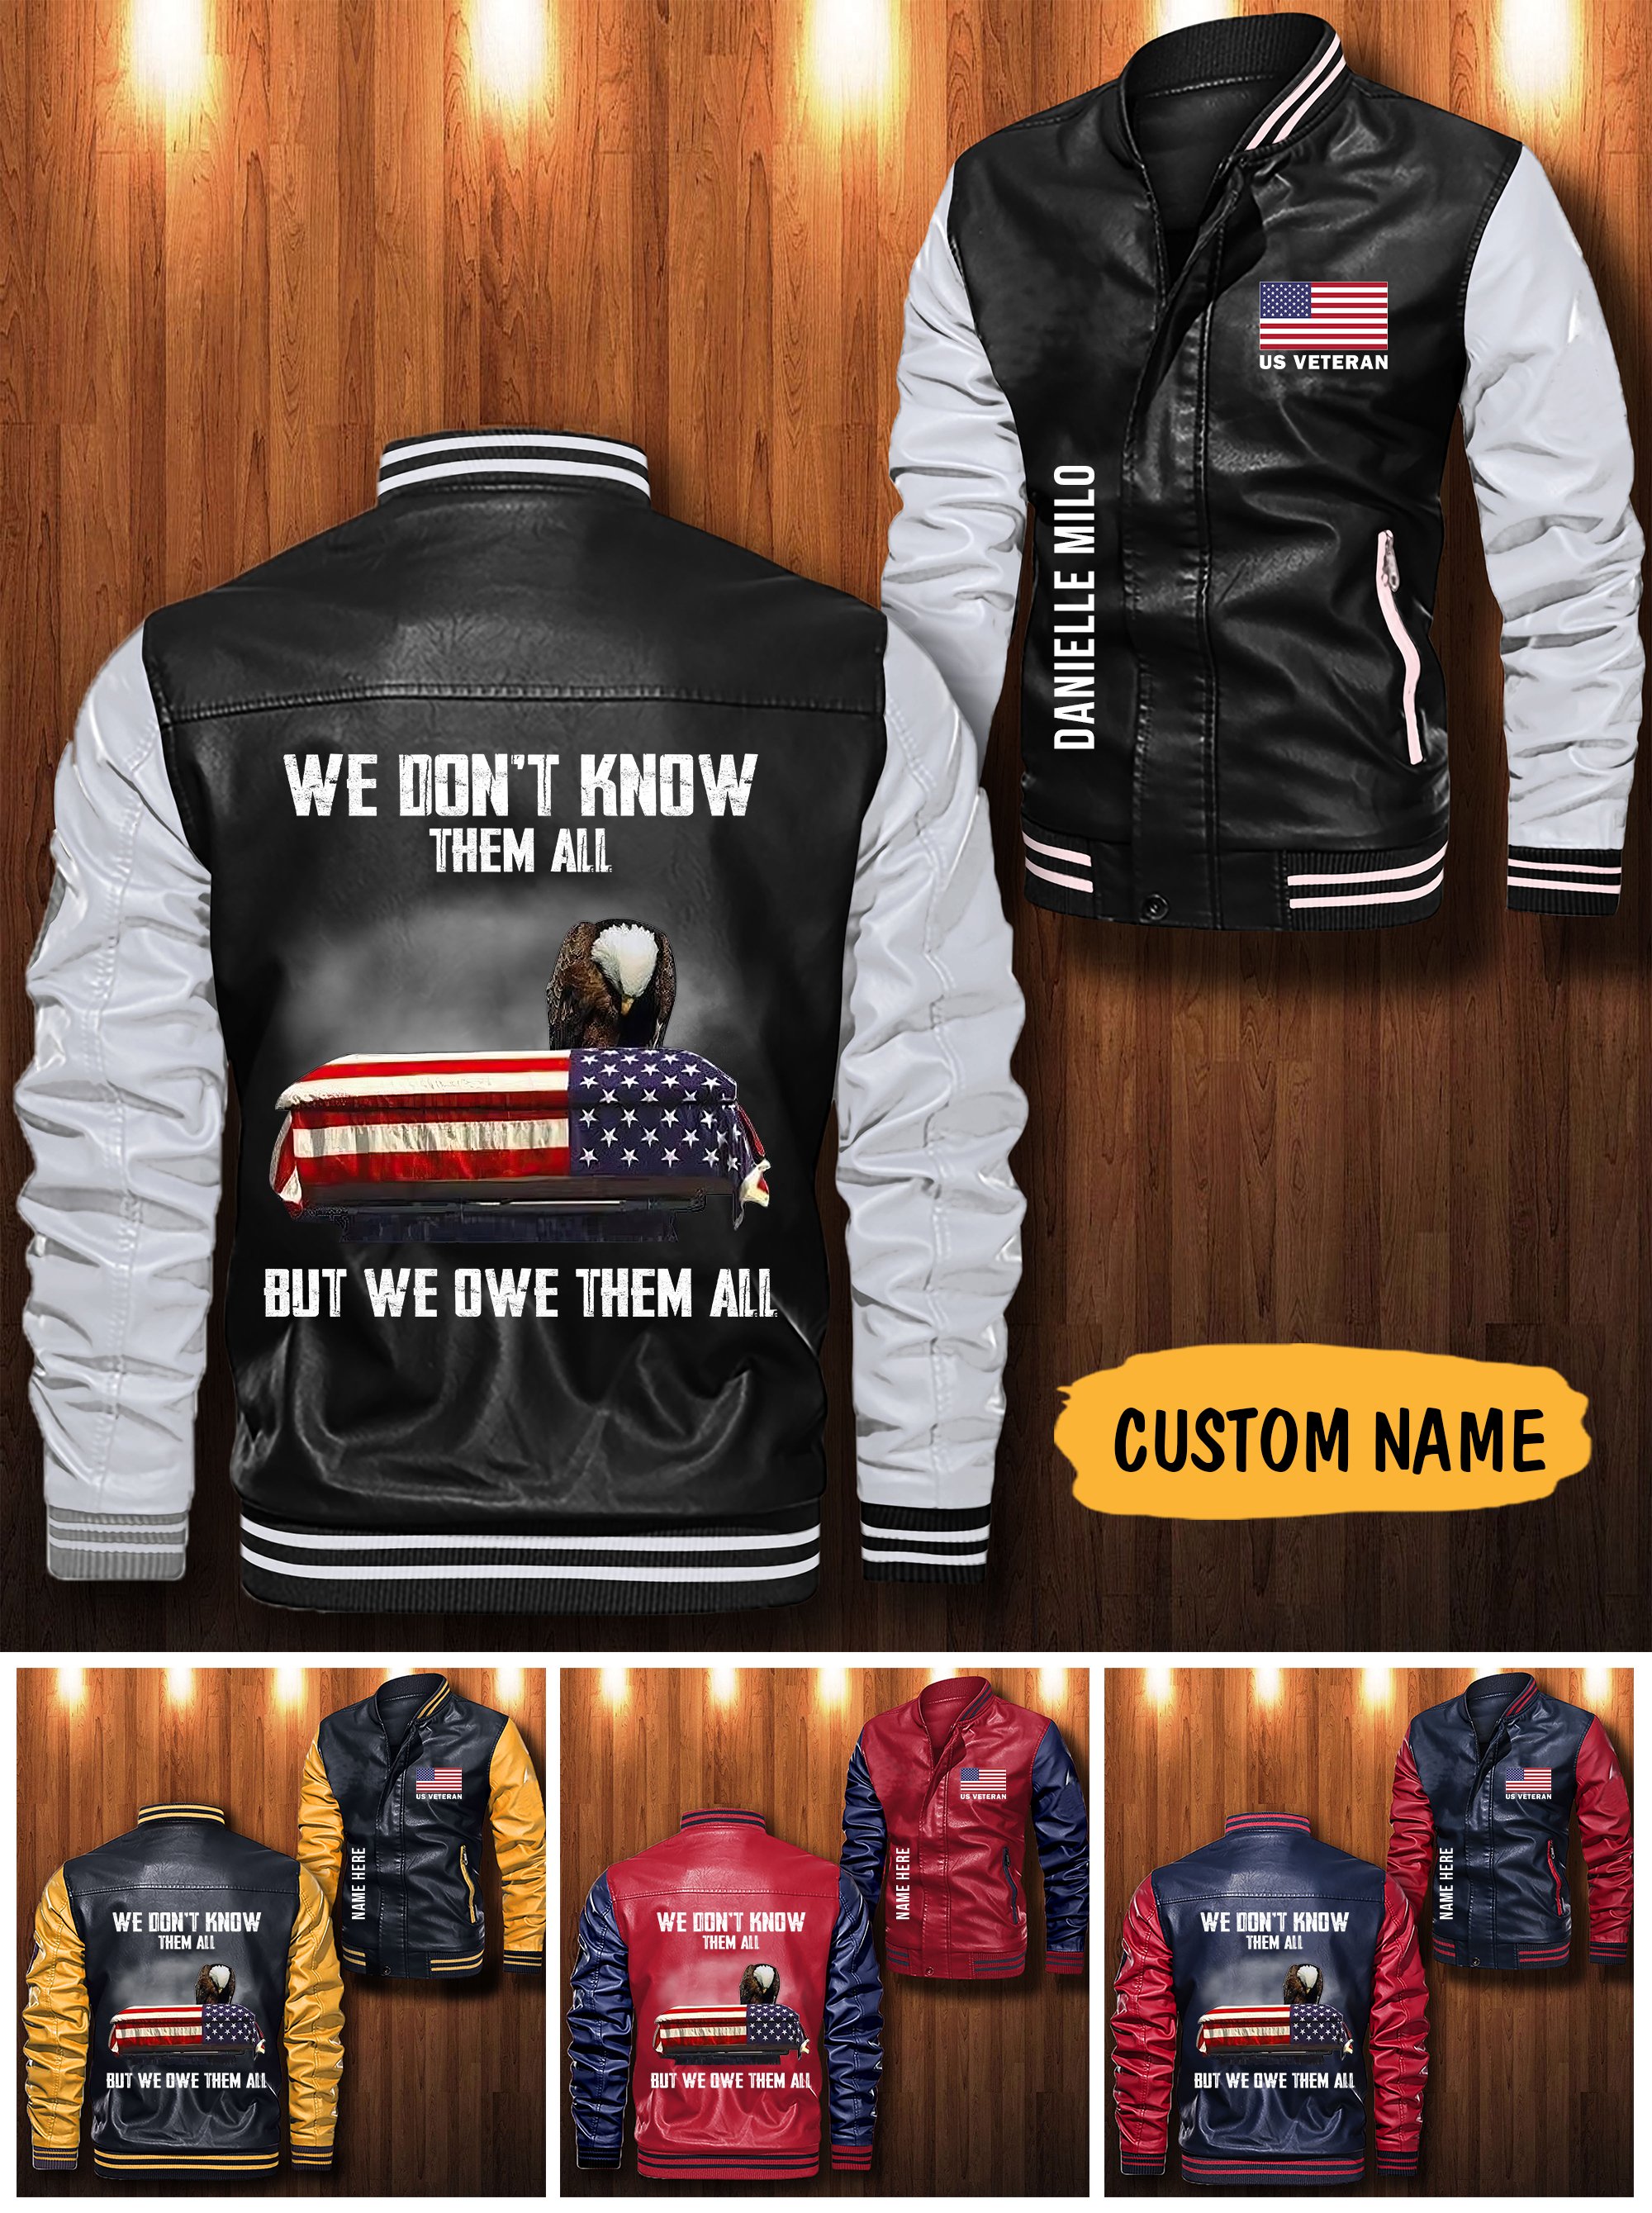 US veteran we don't know them all but we owe them all custom personalized Leather Bomber Jacket 1